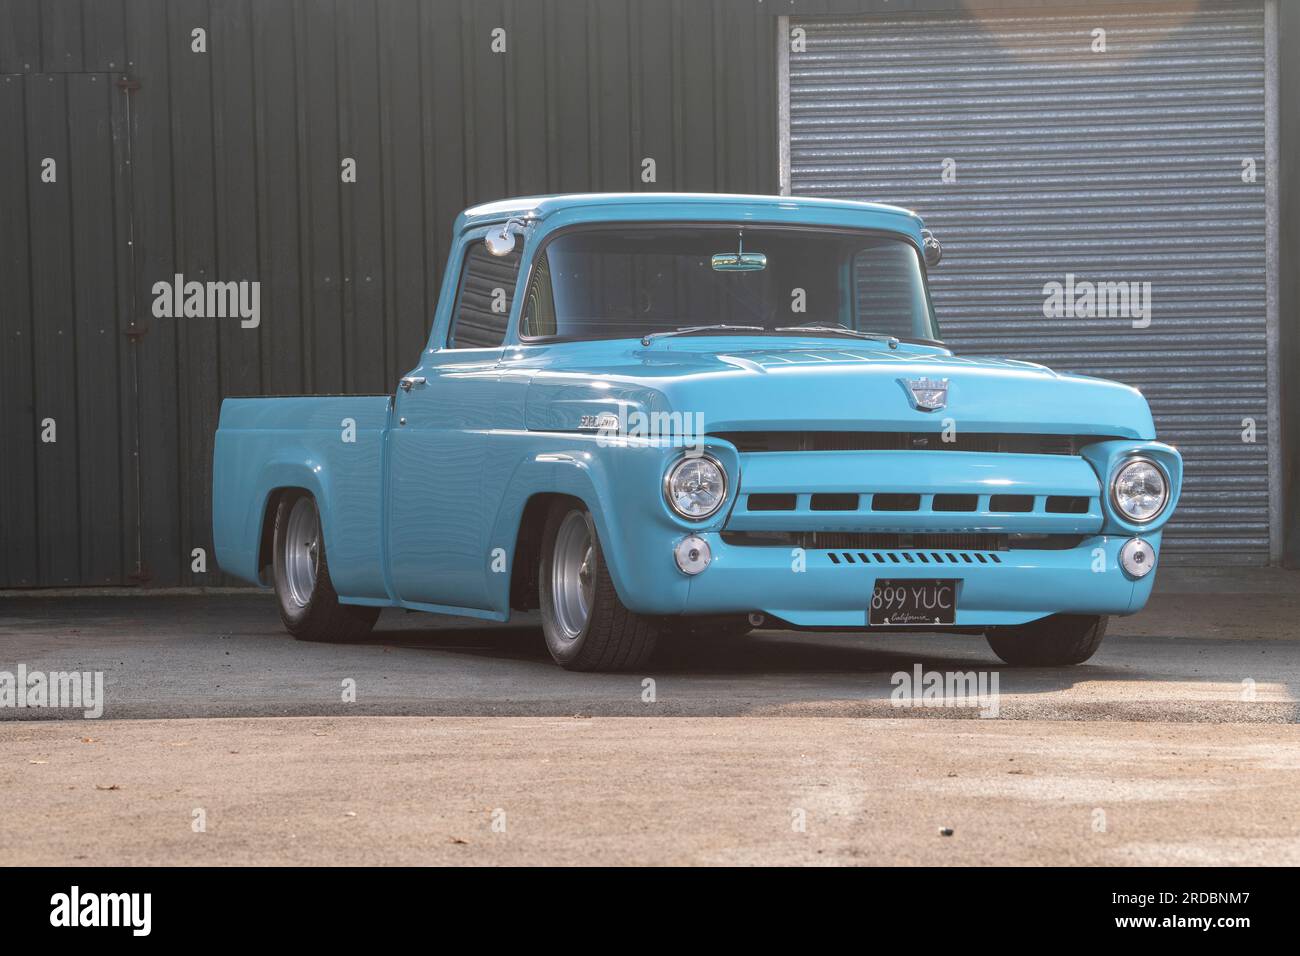 lowered Ford F100 classic American pick up truck Stock Photo